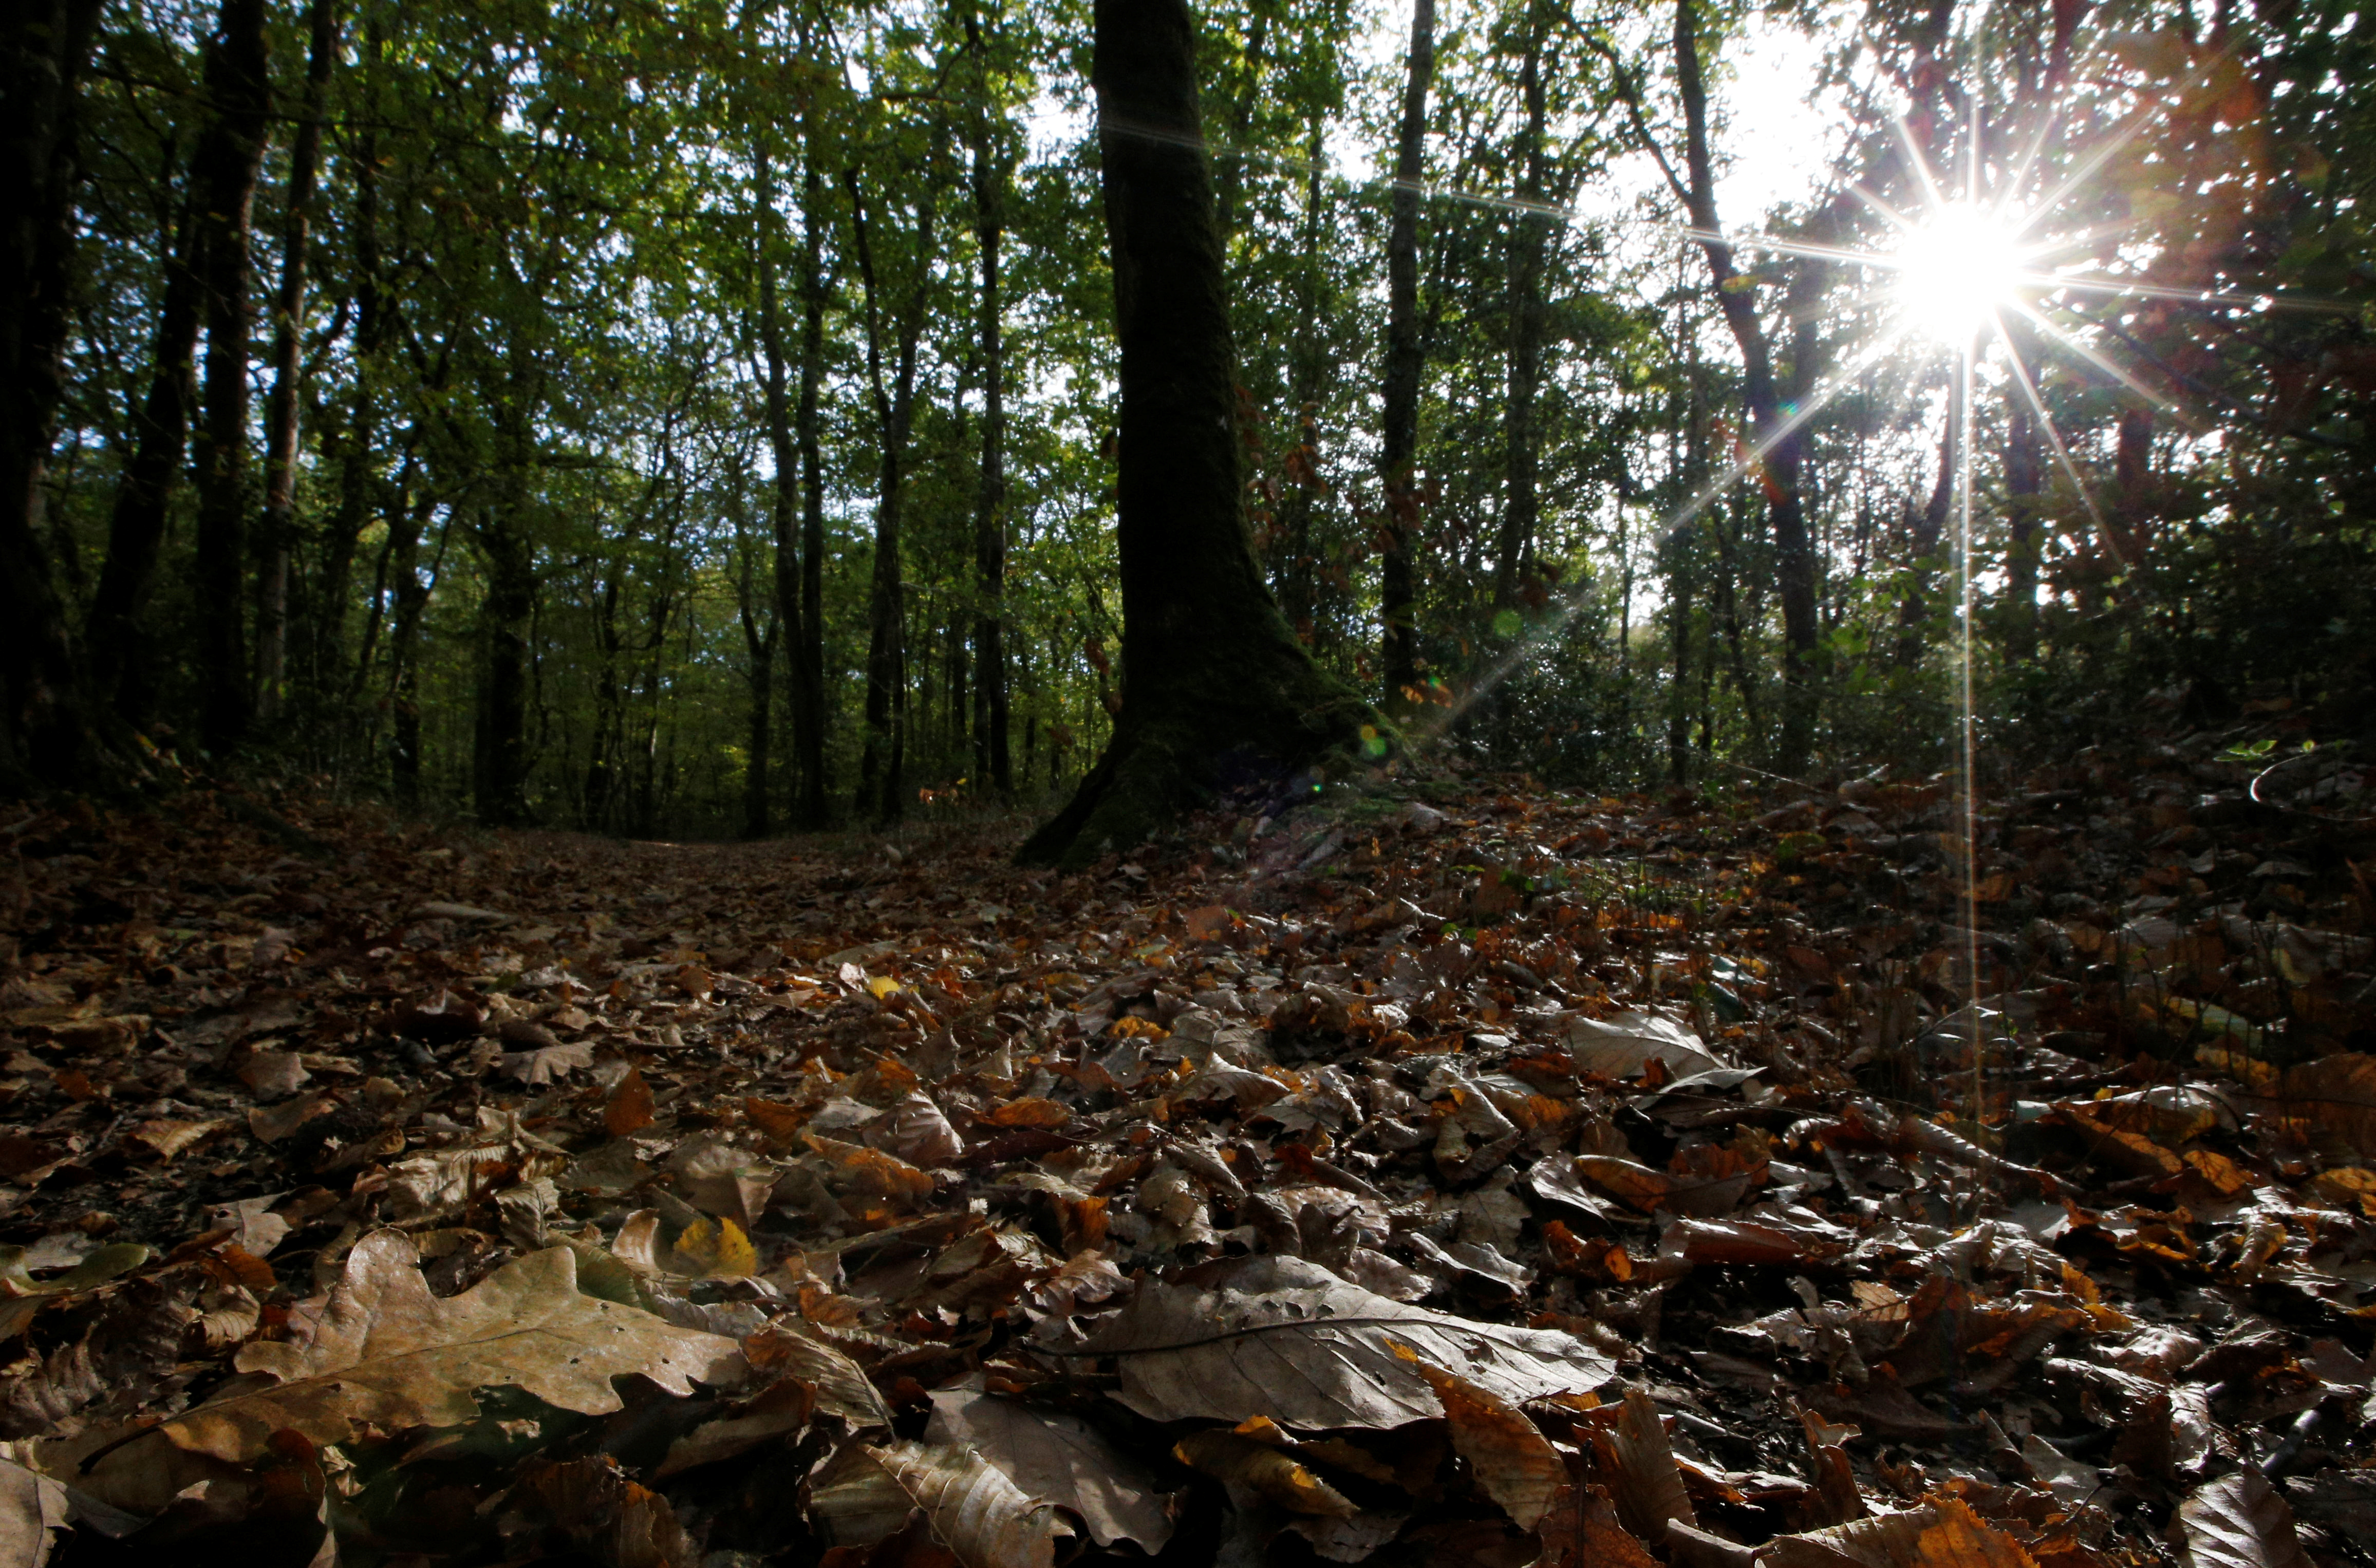 Fallen autumn leafs are seen in a forest in Vertou